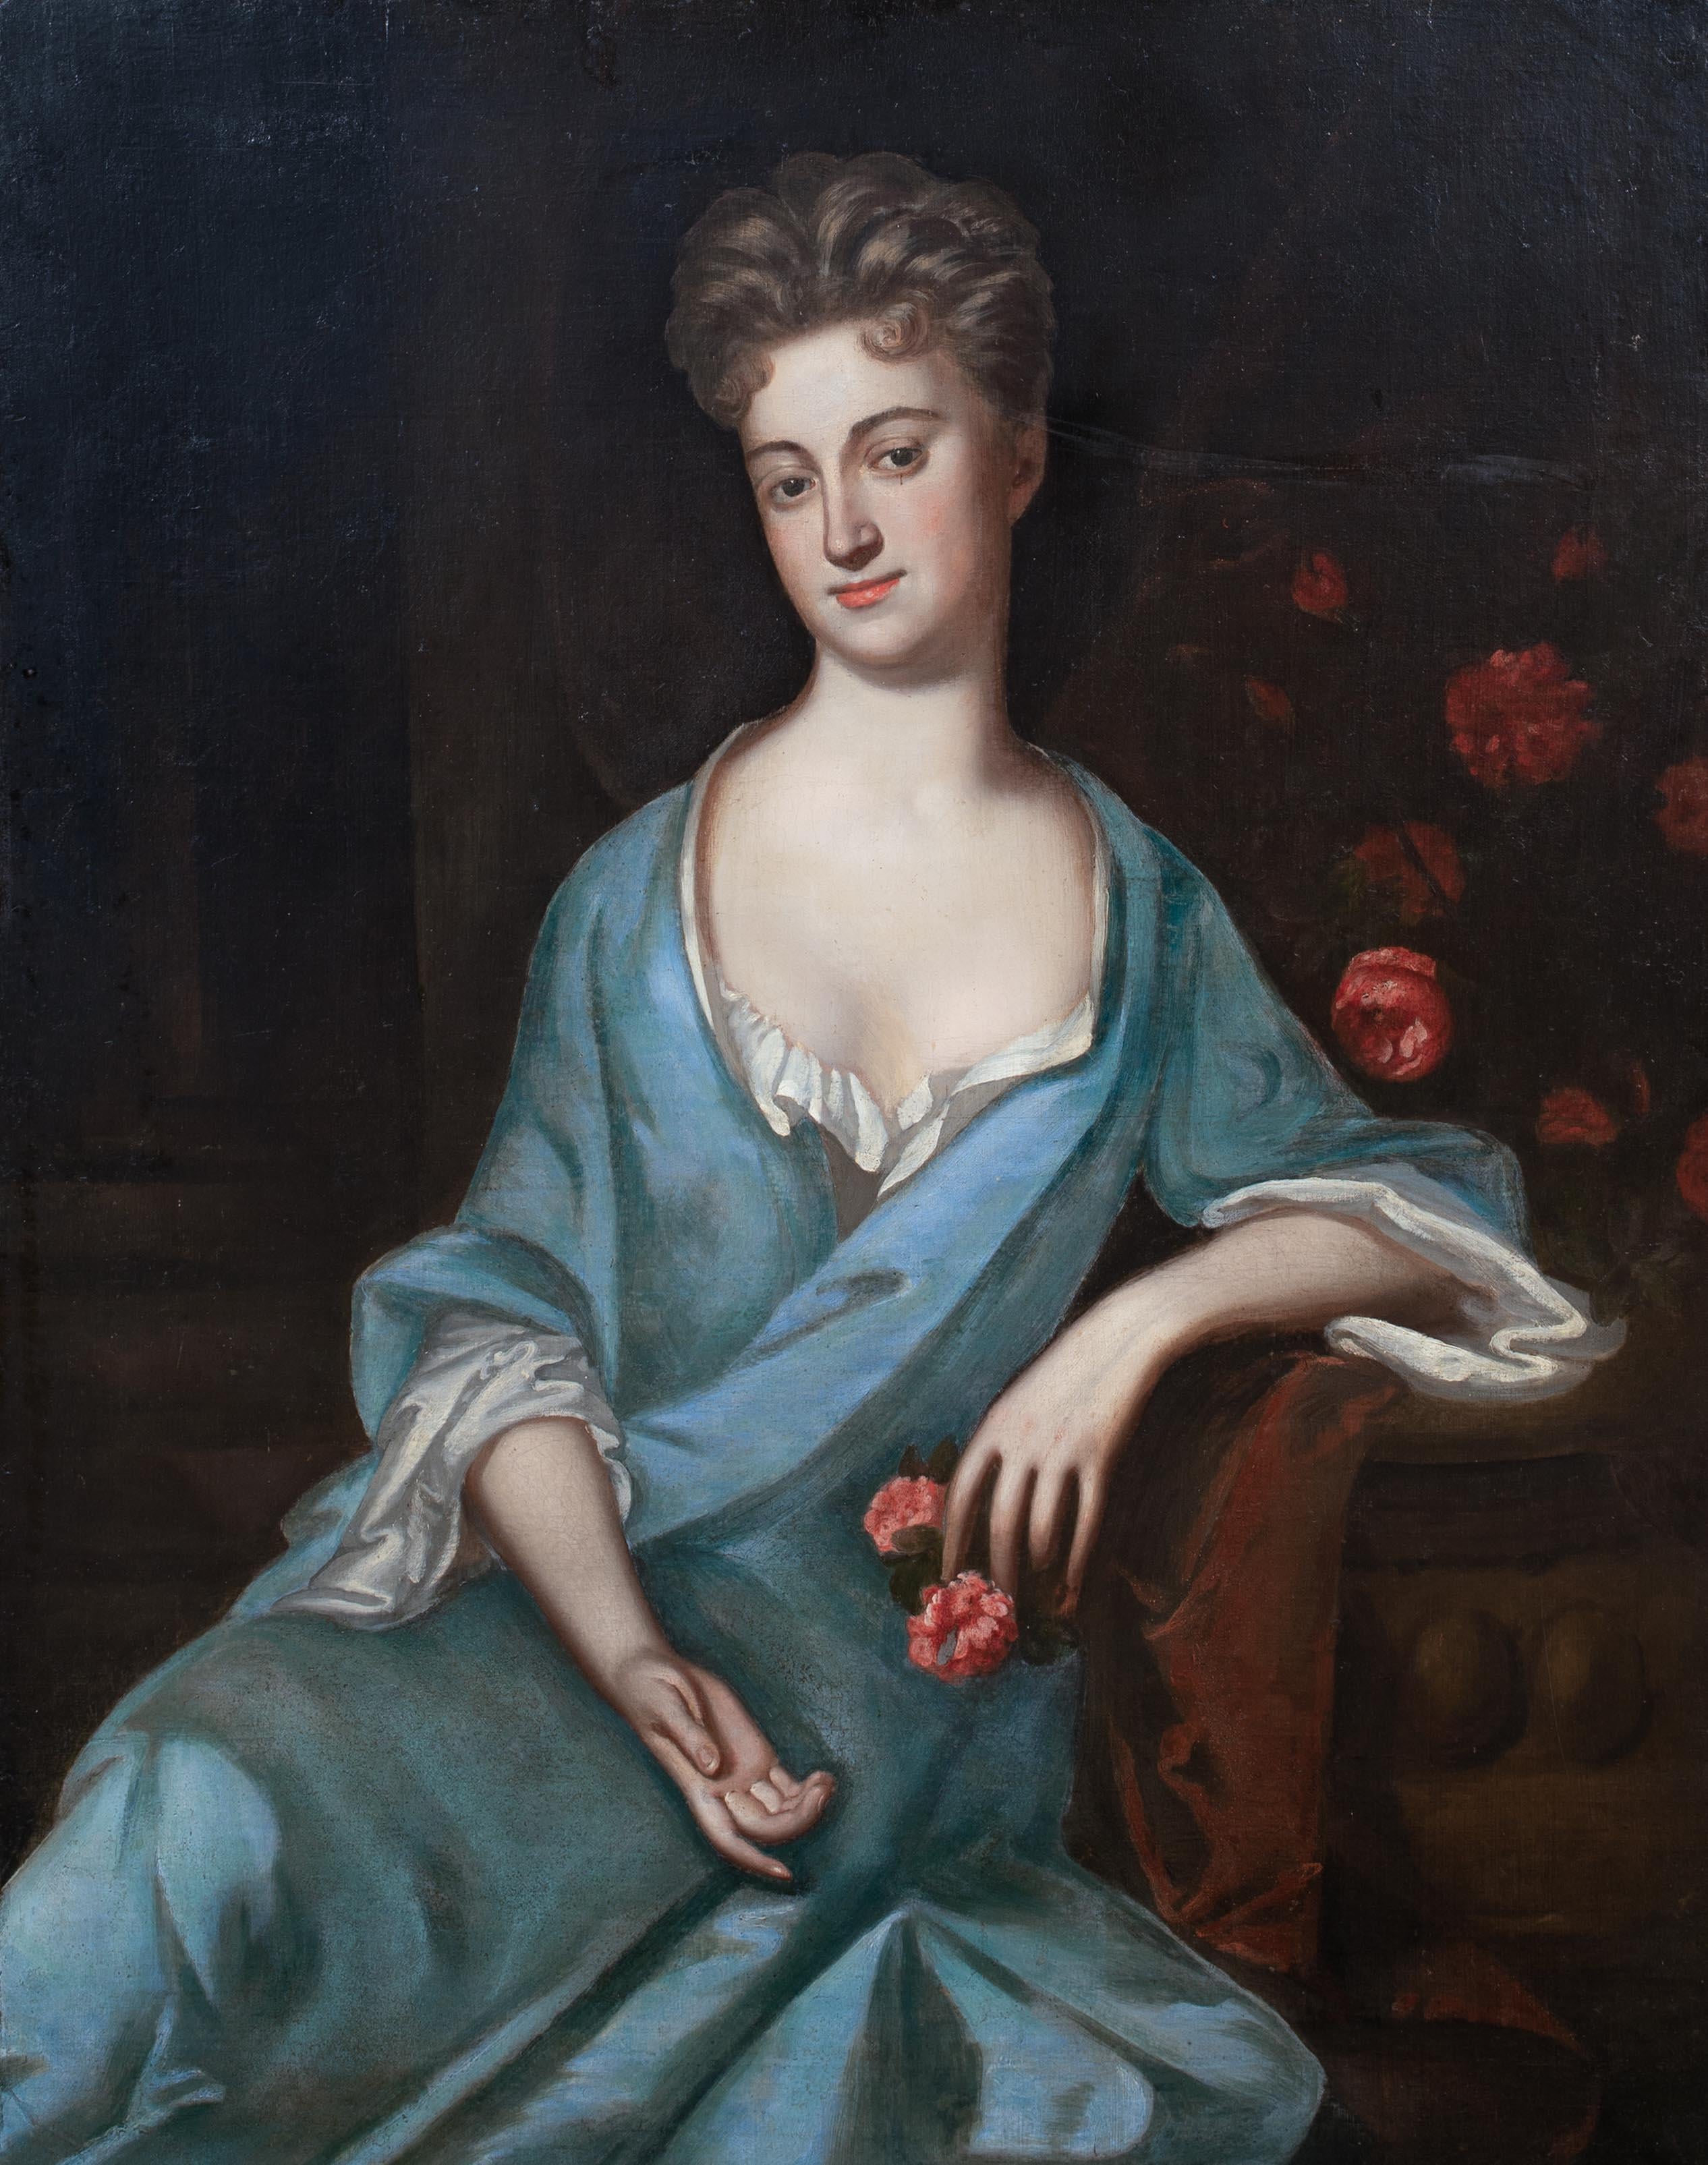 Portrait Anne Spencer, Countess of Sunderland (1683-1716)

circle of Michael DAHL (1659-1743)

Large 18th century portrait of a lady identified as Anne Spencer (Lady Anne Churchill) Countess of Sunderland, oil on canvas. Good quality and condition,